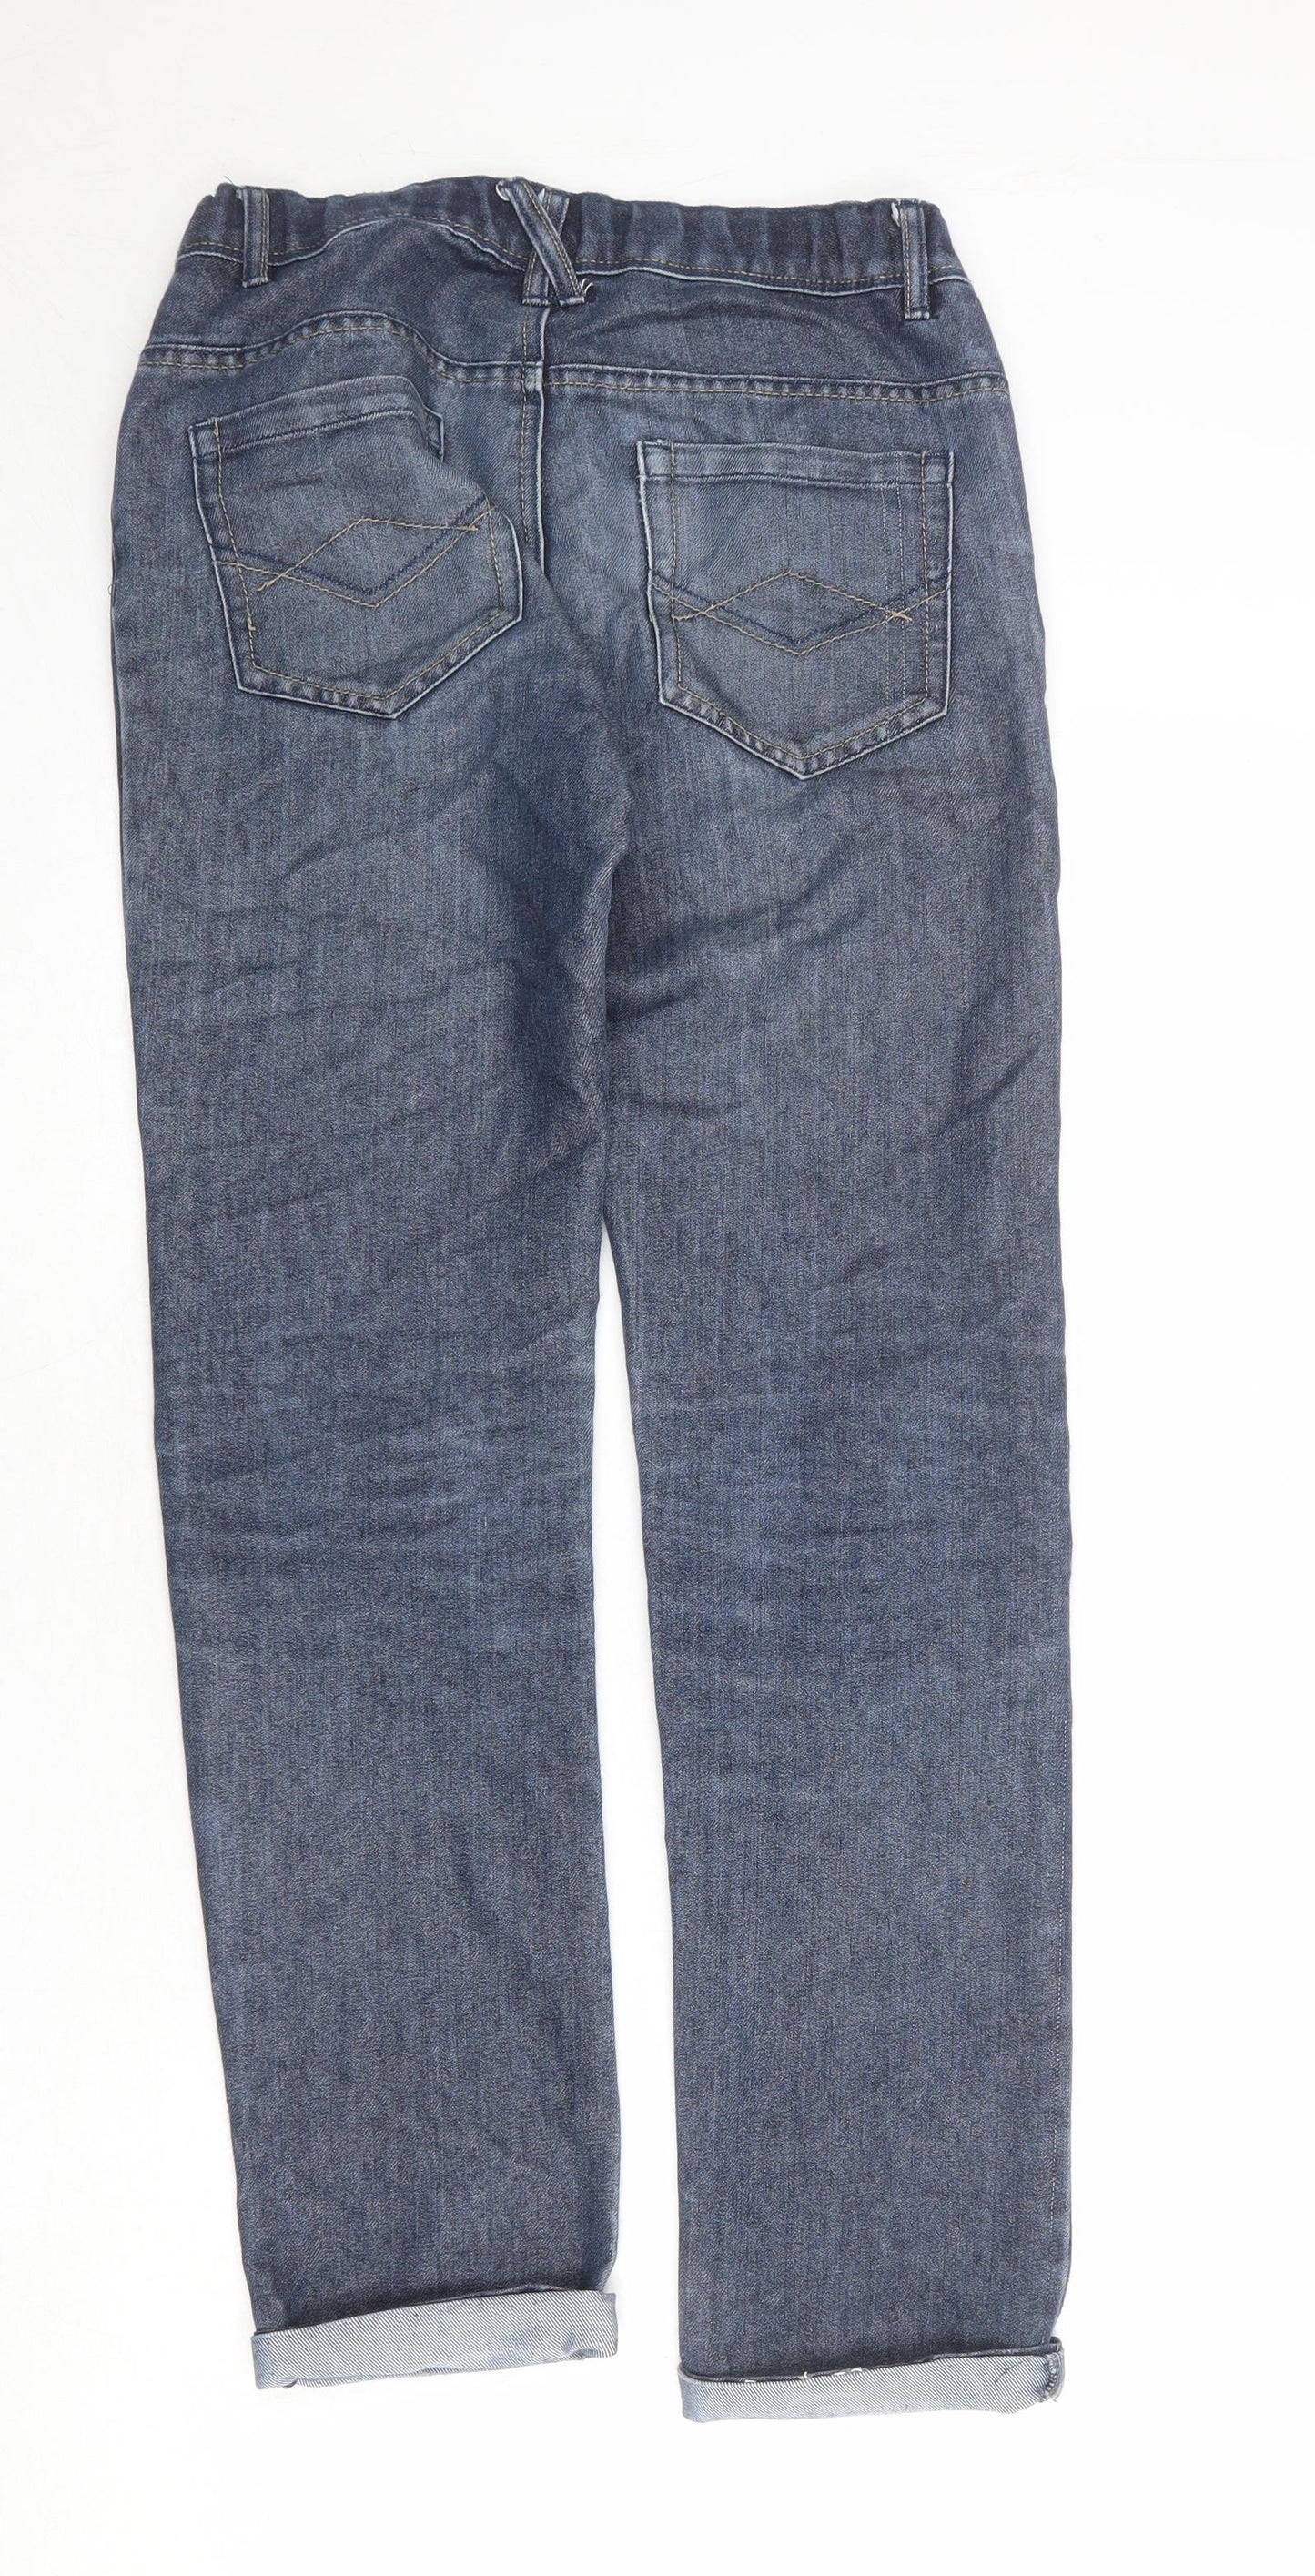 Urban Outlaws Boys Blue Cotton Straight Jeans Size 14 Years Regular Zip